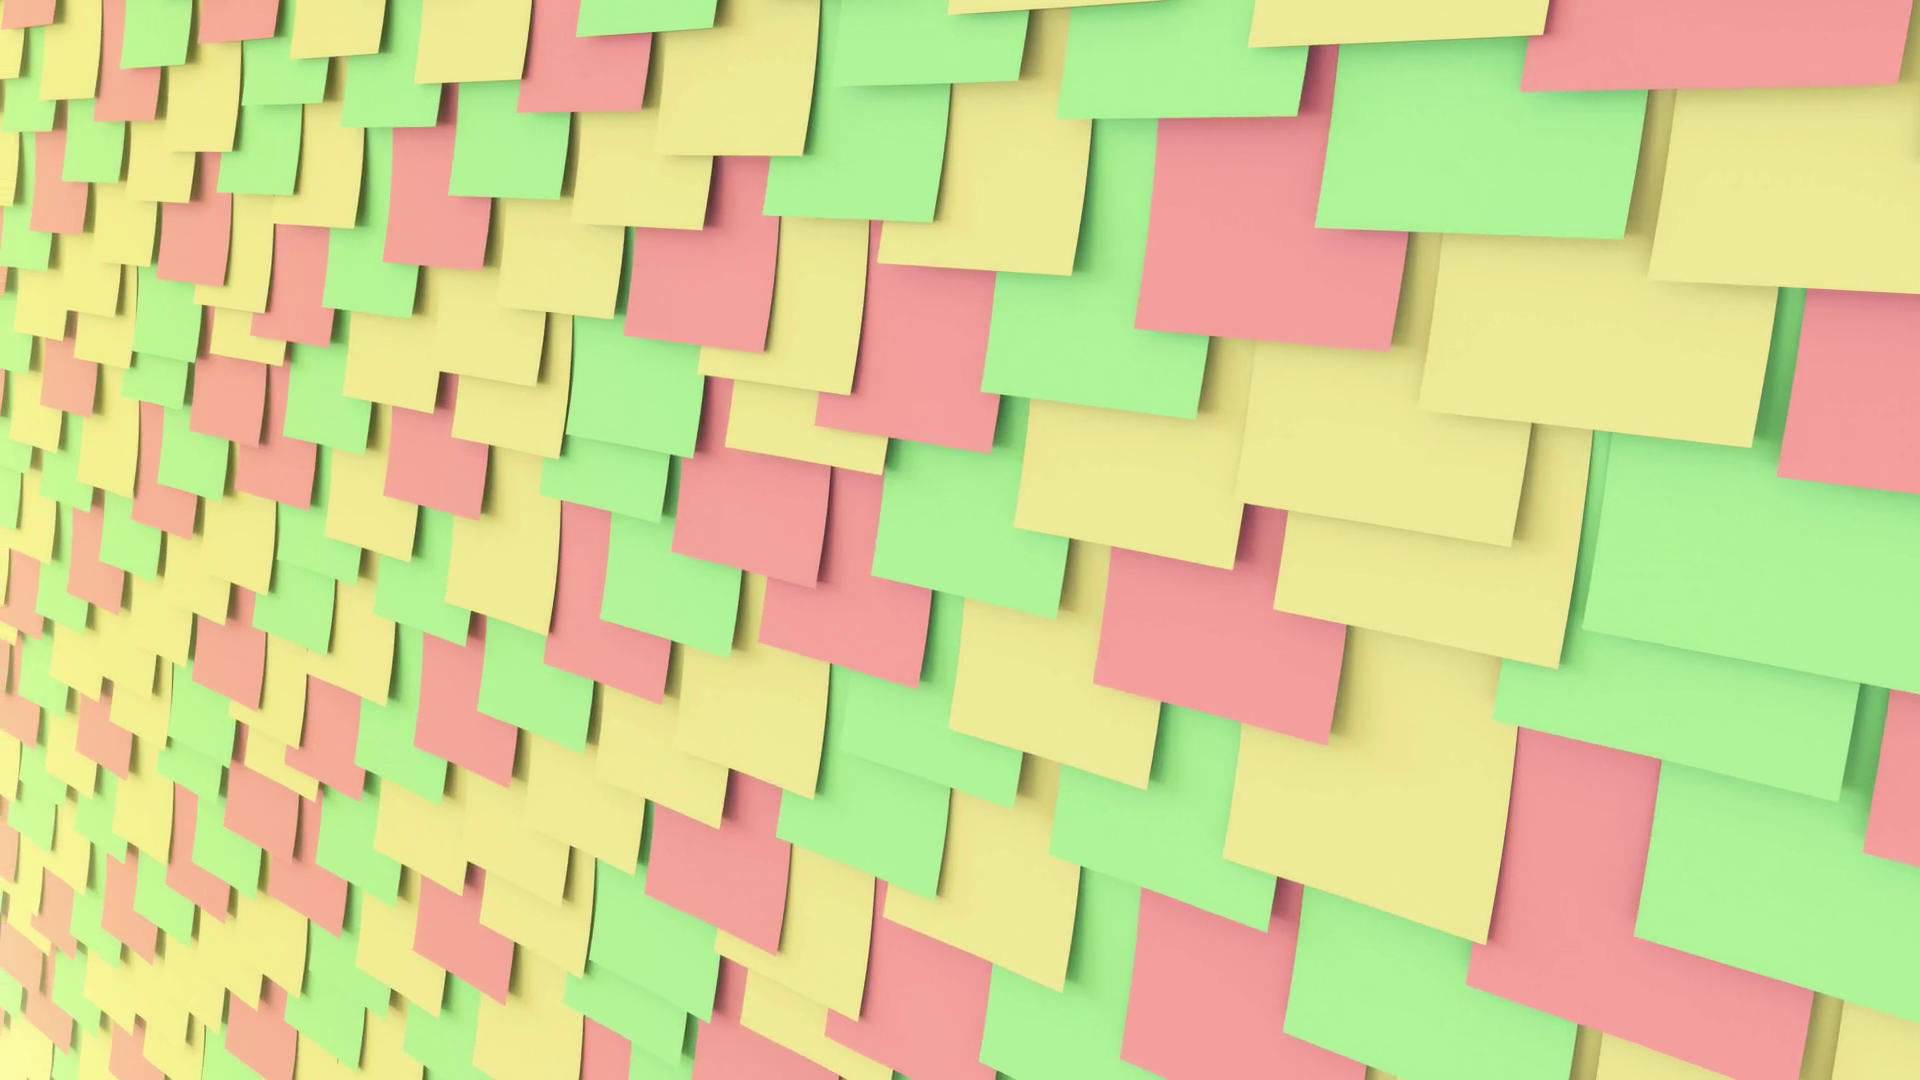 sticky notes wallpaper,green,pink,pattern,yellow,turquoise